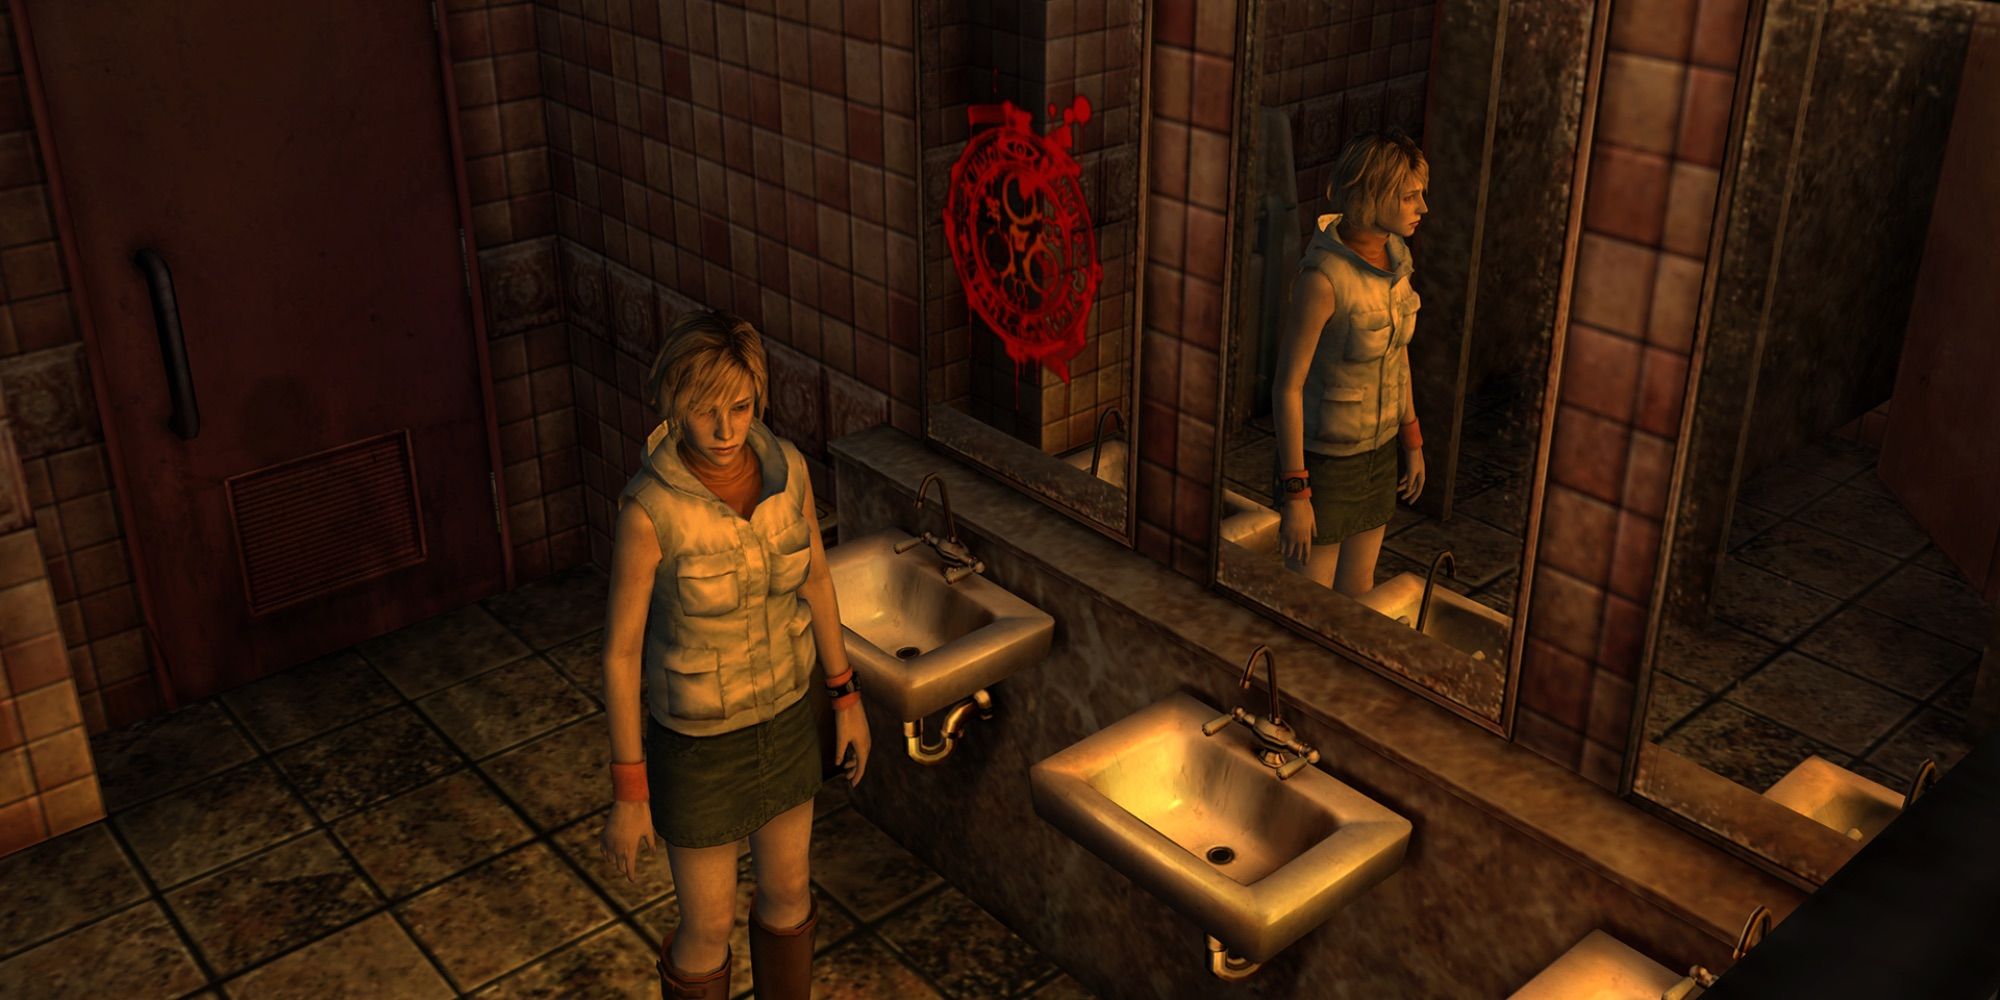 10 Ways Silent Hill Changed Video Games Forever